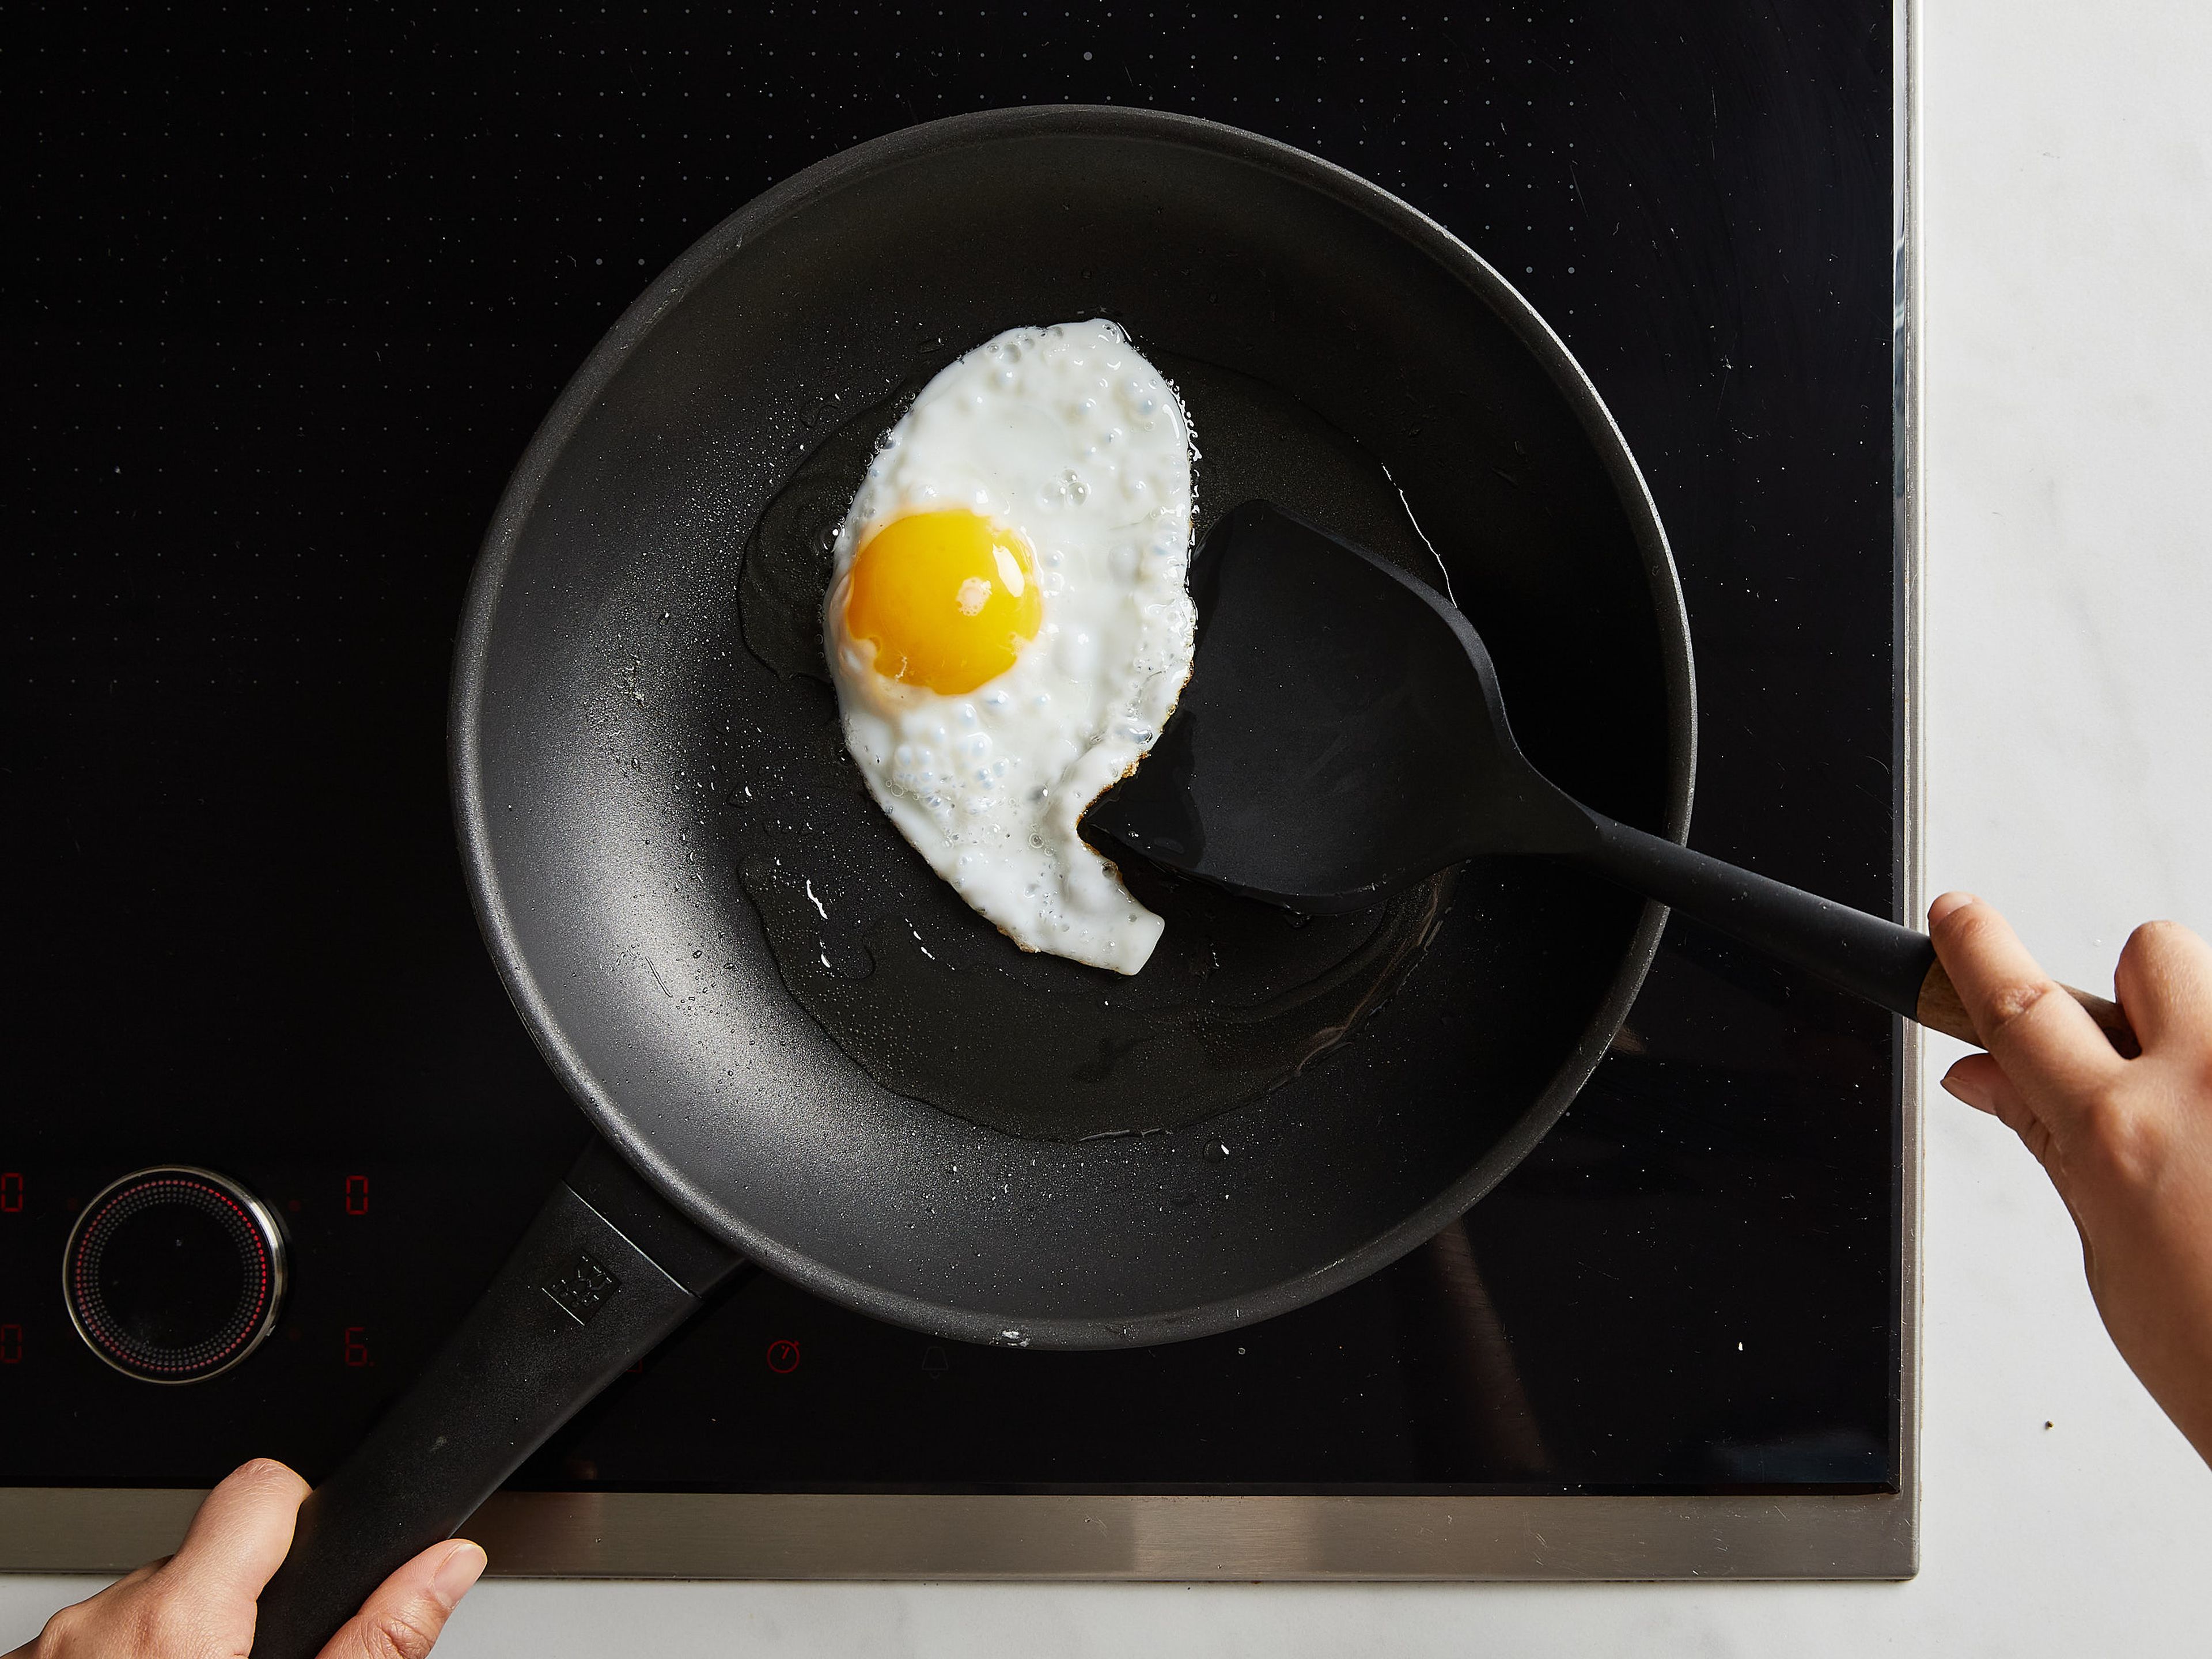 In a frying pan, heat oil over medium-high heat. Crack in the eggs and fry until the edge is crispy and the whites are set. Remove and set aside.